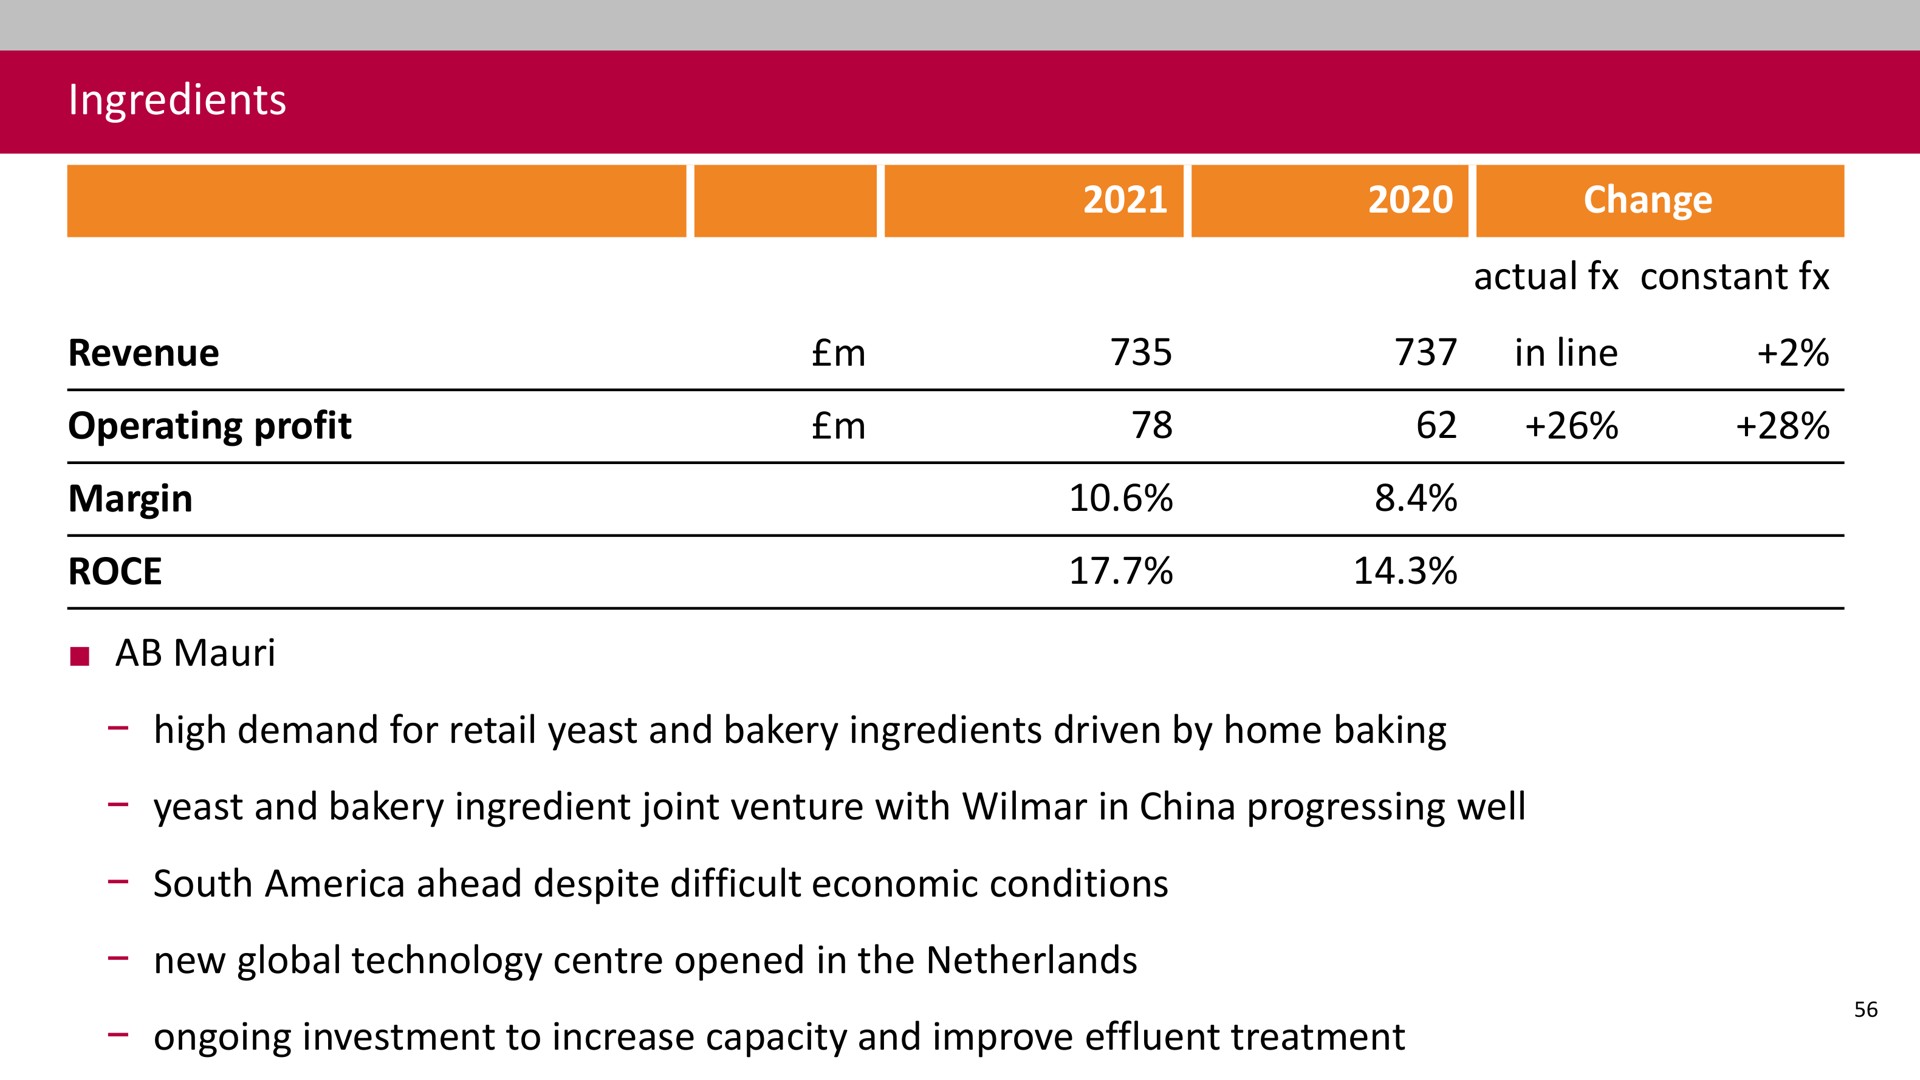 ingredients revenue operating profit margin change actual constant in line high demand for retail yeast and bakery ingredients driven by home baking yeast and bakery ingredient joint venture with in china progressing well south ahead despite difficult economic conditions new global technology opened in the ongoing investment to increase capacity and improve effluent treatment | Associated British Foods